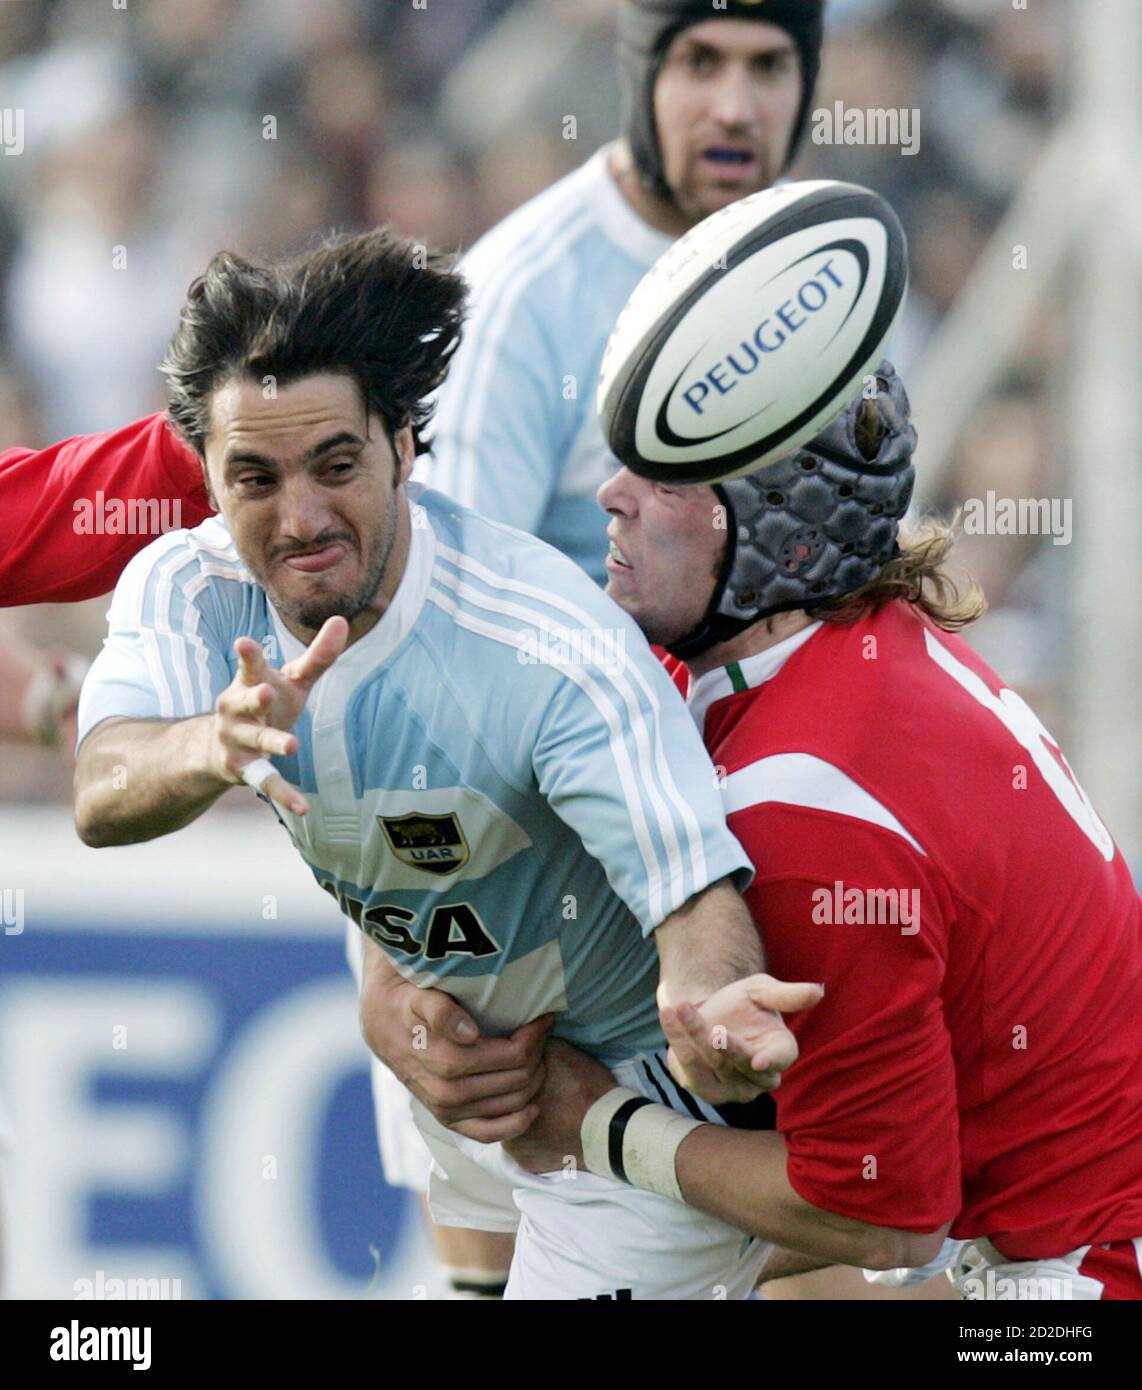 Agustin Pichot (L) of Argentina's Los Pumas is tackled by Alun Wyn Jones of  Wales, as Ignacio Fernandez Lobbe (back) of Los Pumas watches, during their  rugby union test match in Puerto